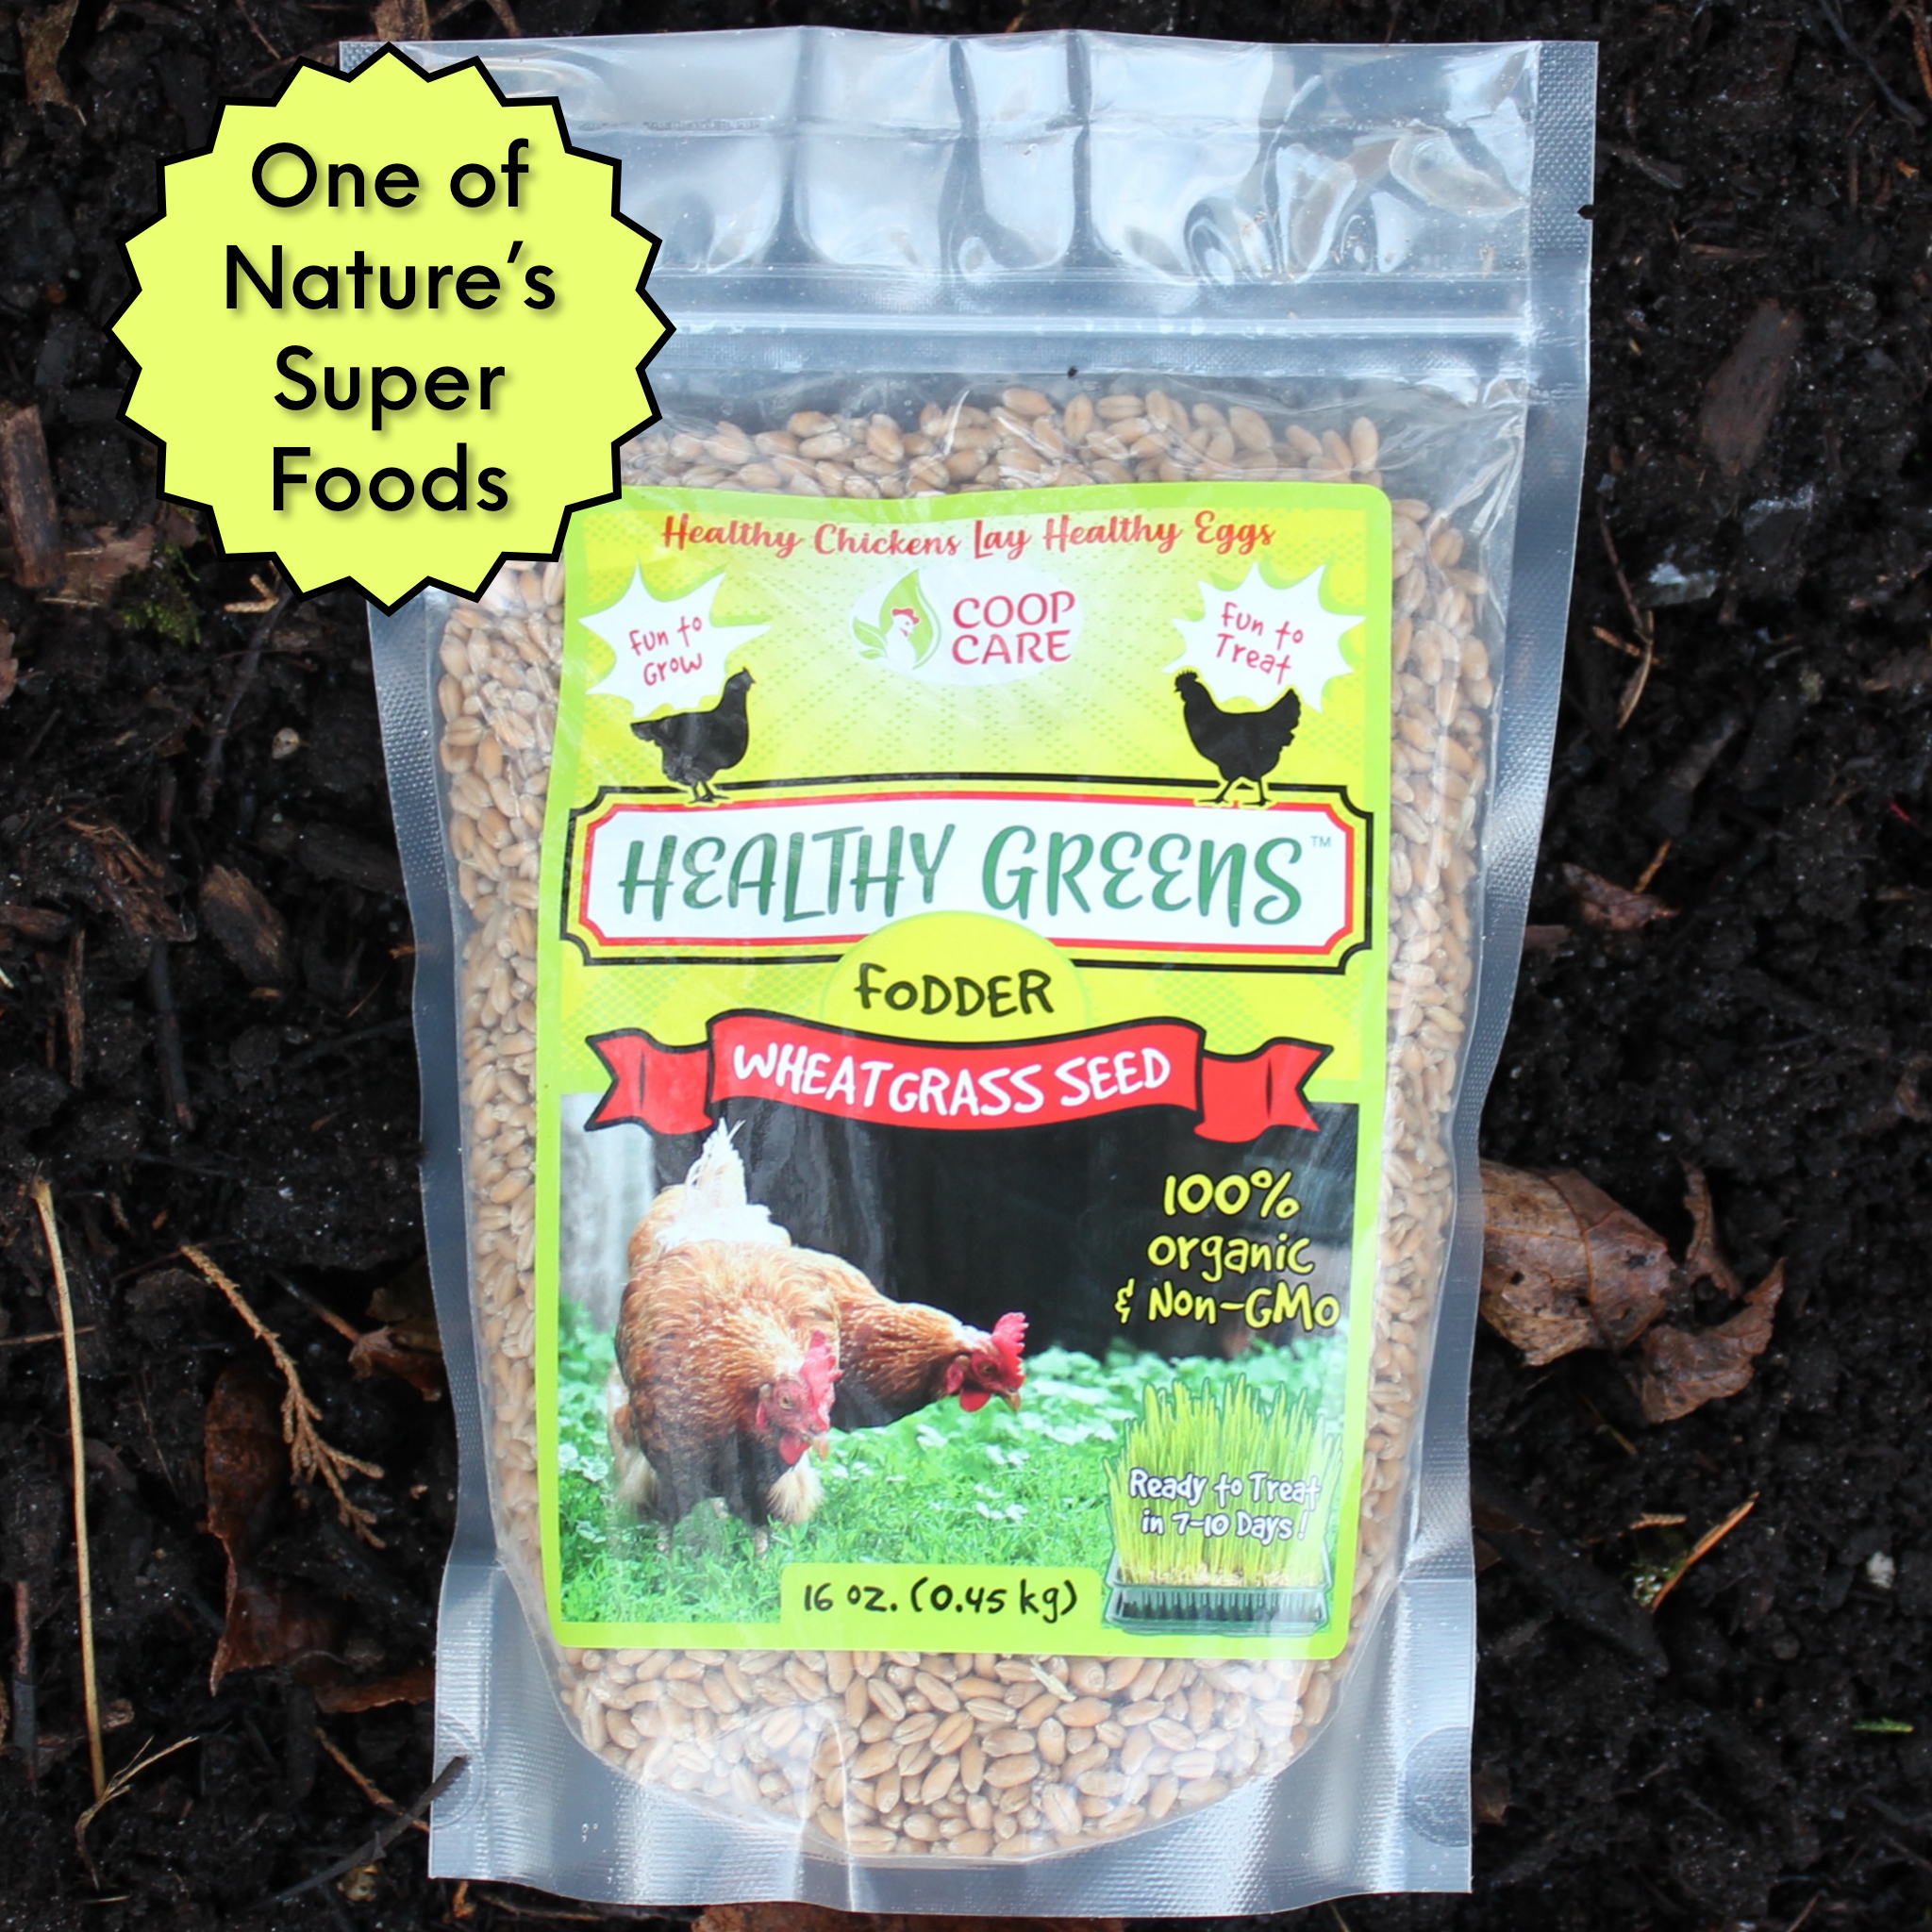 Coop Care Healthy Greens Wheatgrass Fodder Seed, 1lb Bag. Premium Seed, Non-GMO Wheatgrass Seeds for Backyard Chickens, Plant Indoors/Outdoors. Also Ideal for Cats, Dogs w/ FREE Chick Fresh